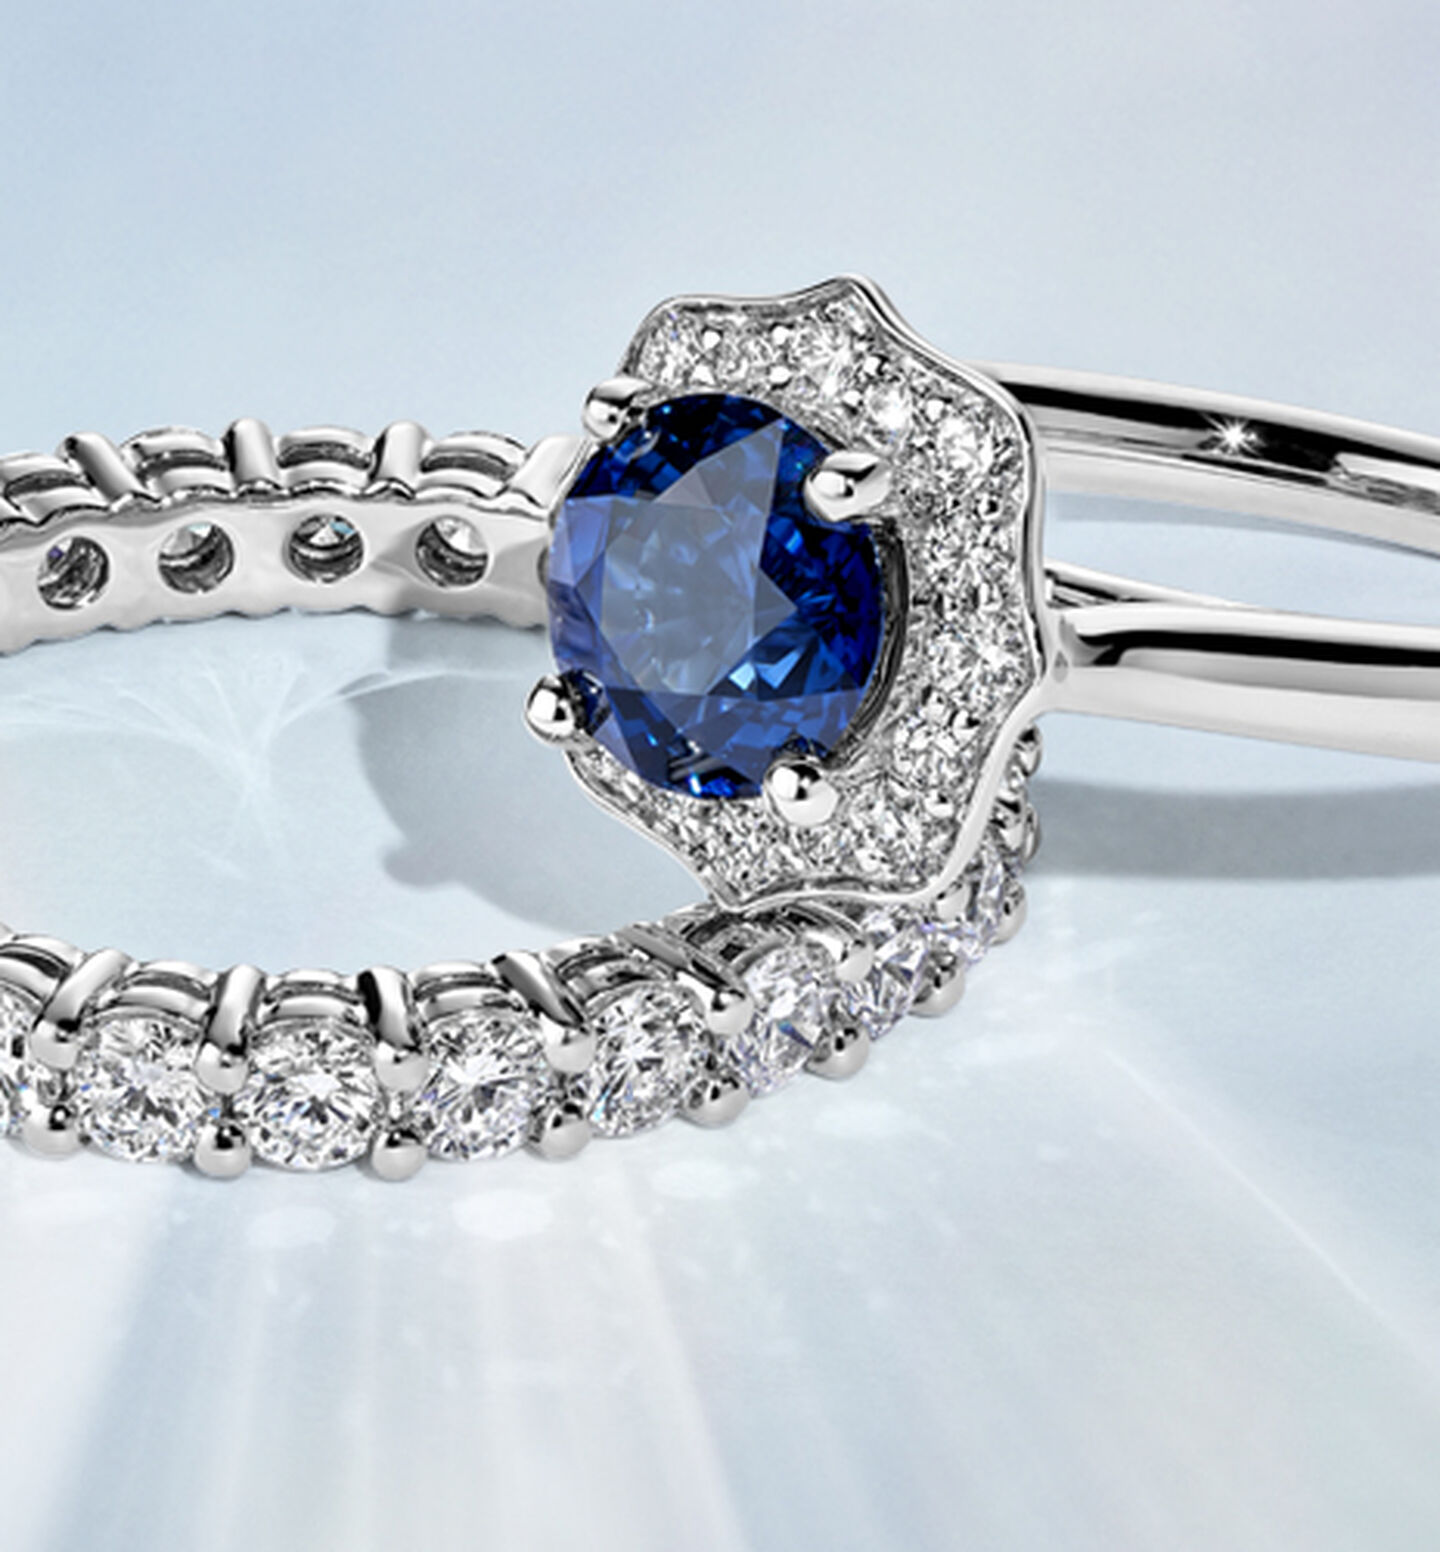 A Birks 1879 Sapphire Engagement Ring stacked on an eternity band on a blue background.